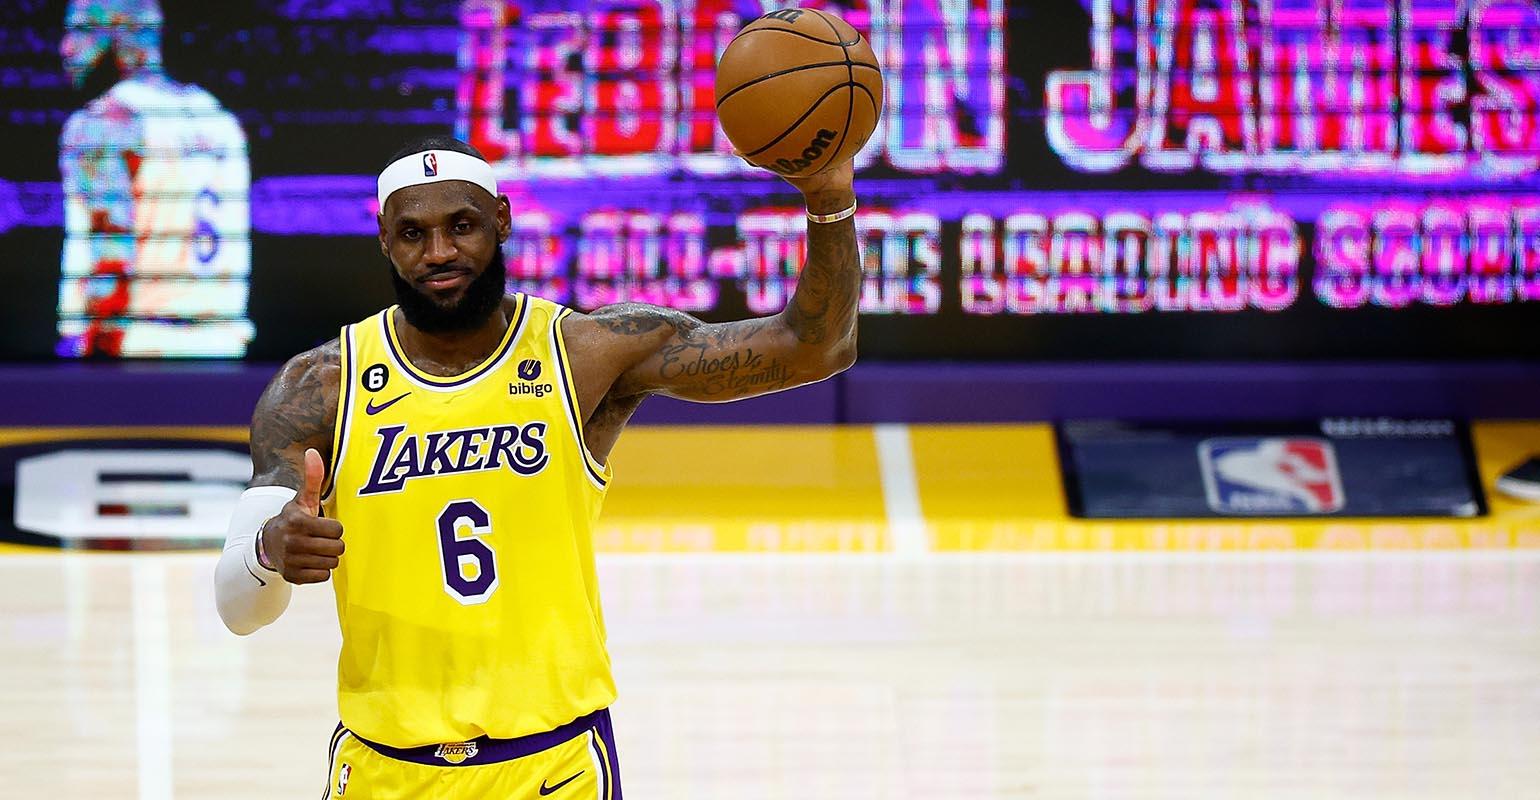 Lebron James now NBA's all-time scoring leader after 38 point